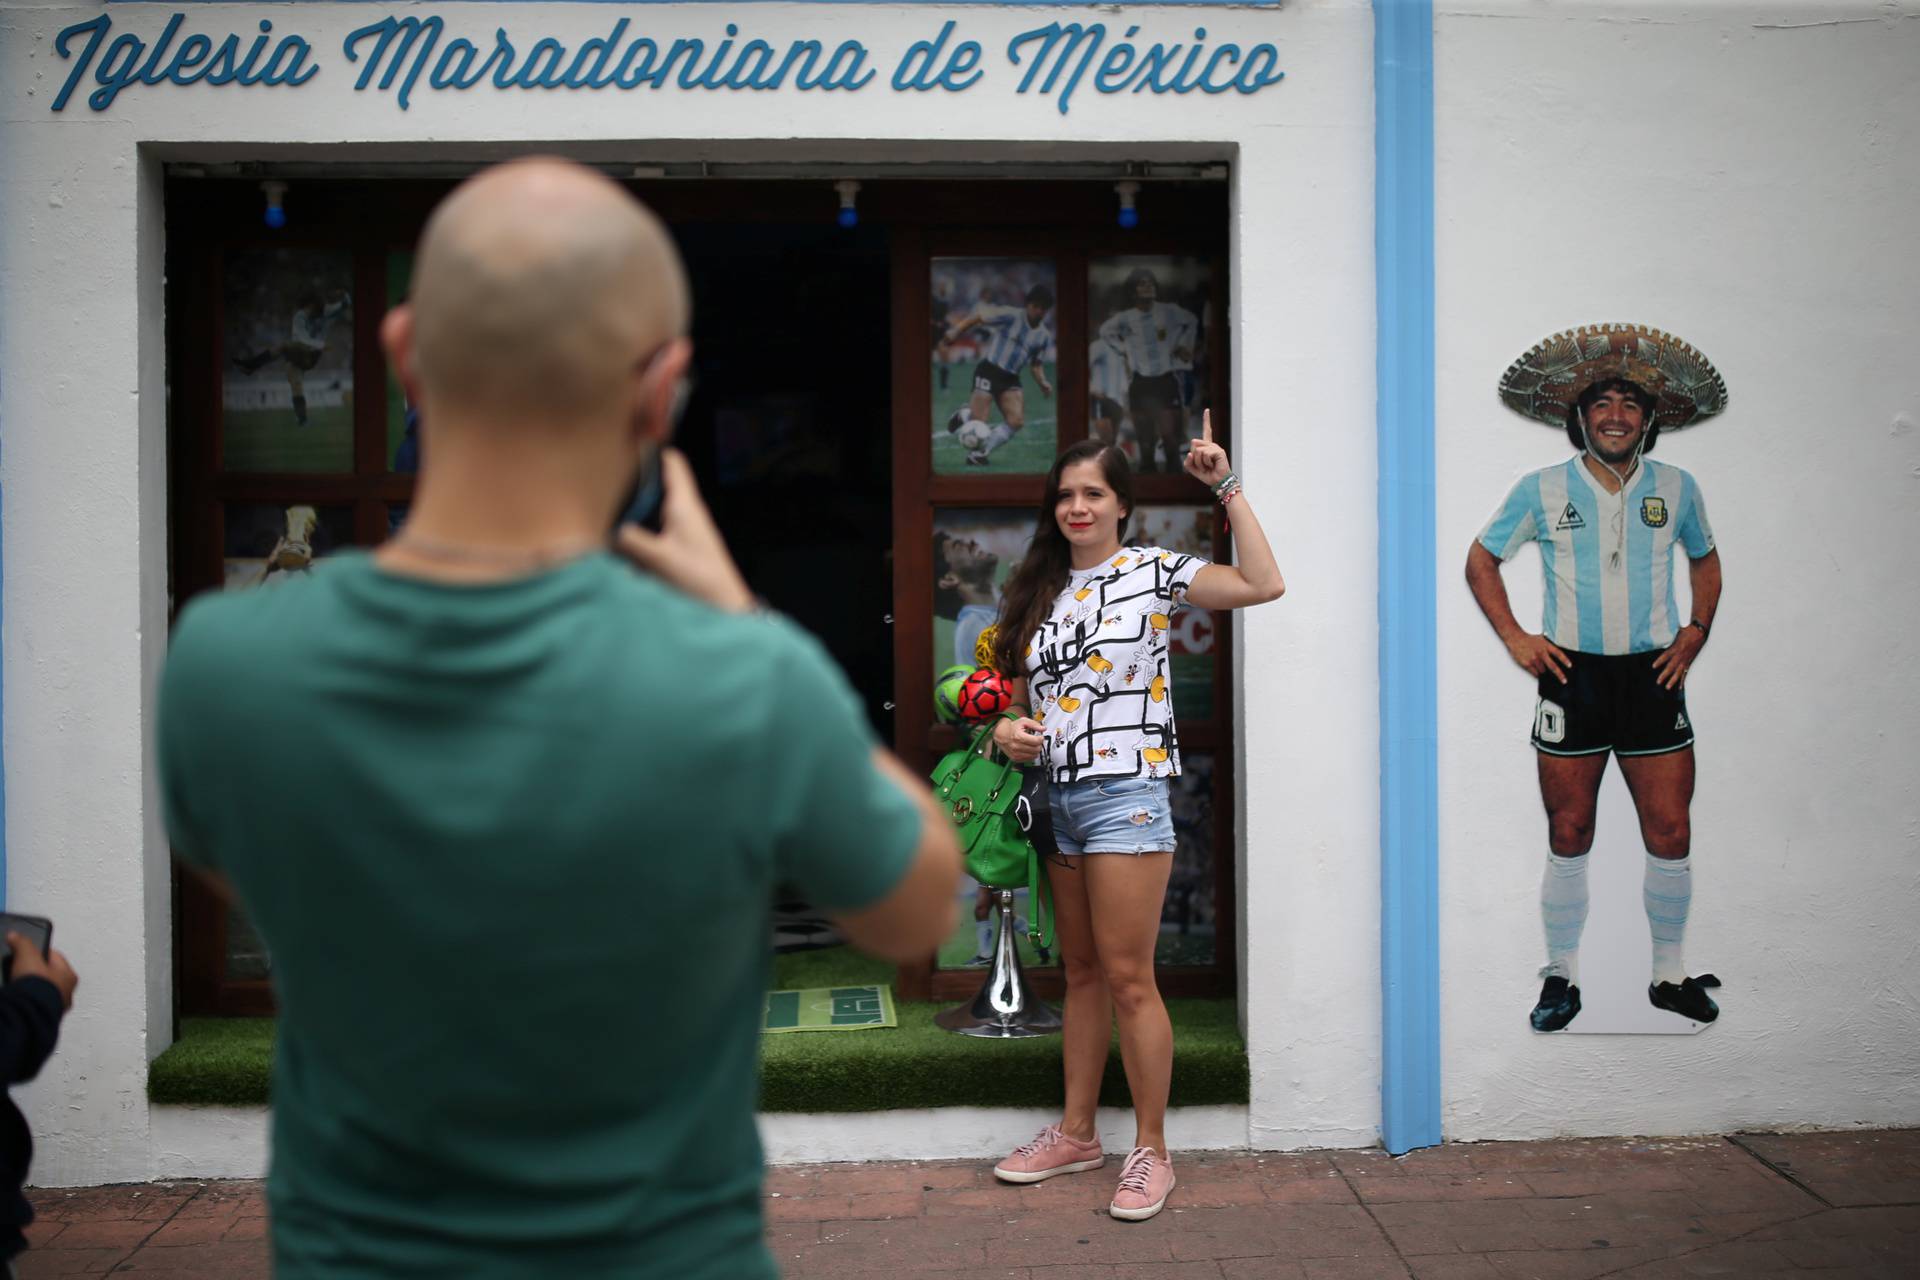 A fan takes photos at the entrance to the first Mexico's church in memory of soccer legend Diego Armando Maradona in San Andres Cholula